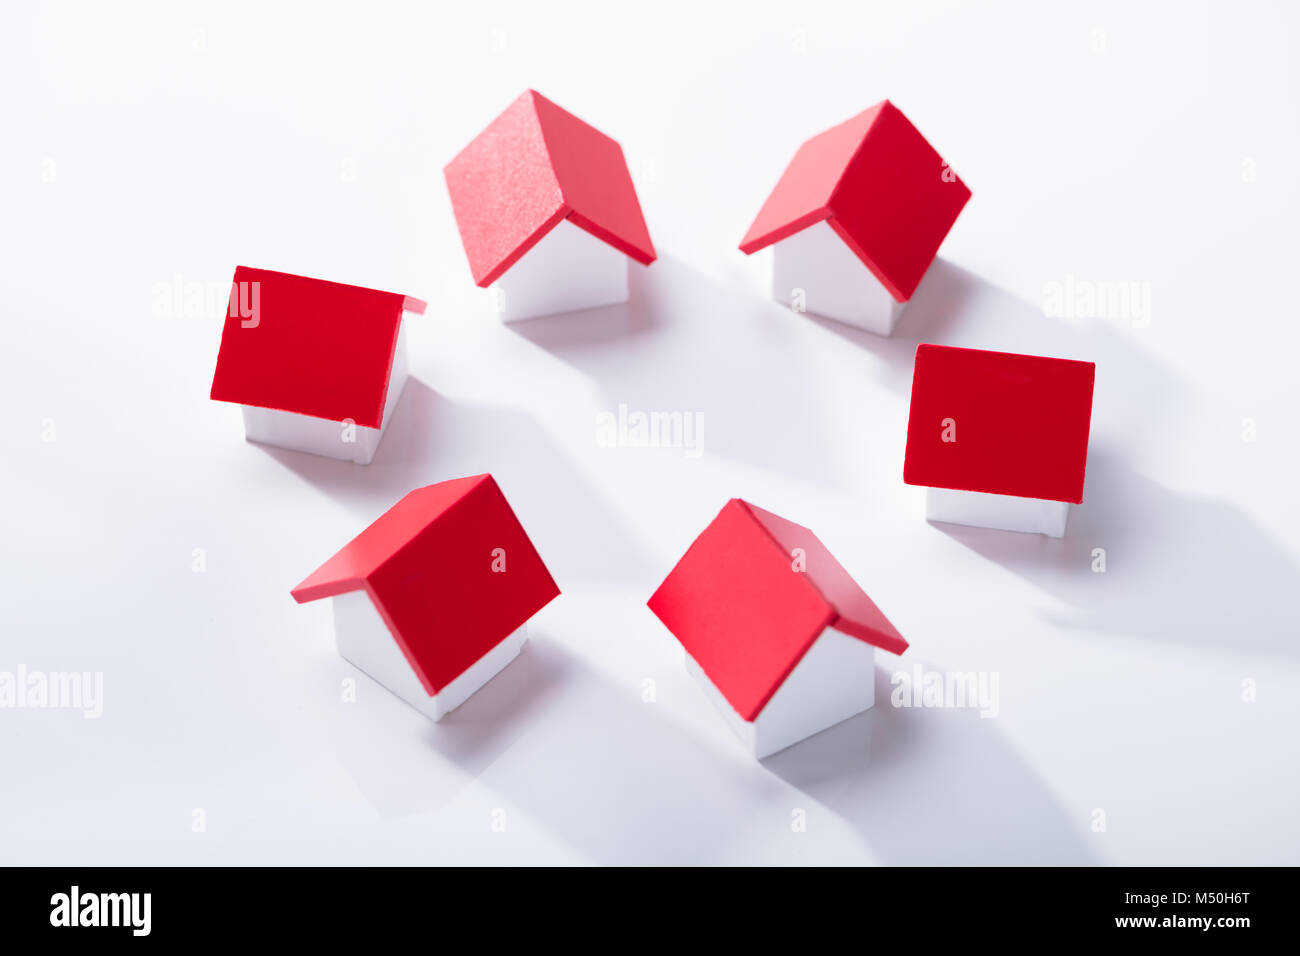 Overhead View Of House Models Arranged In Circle Over The White Background Stock Photo